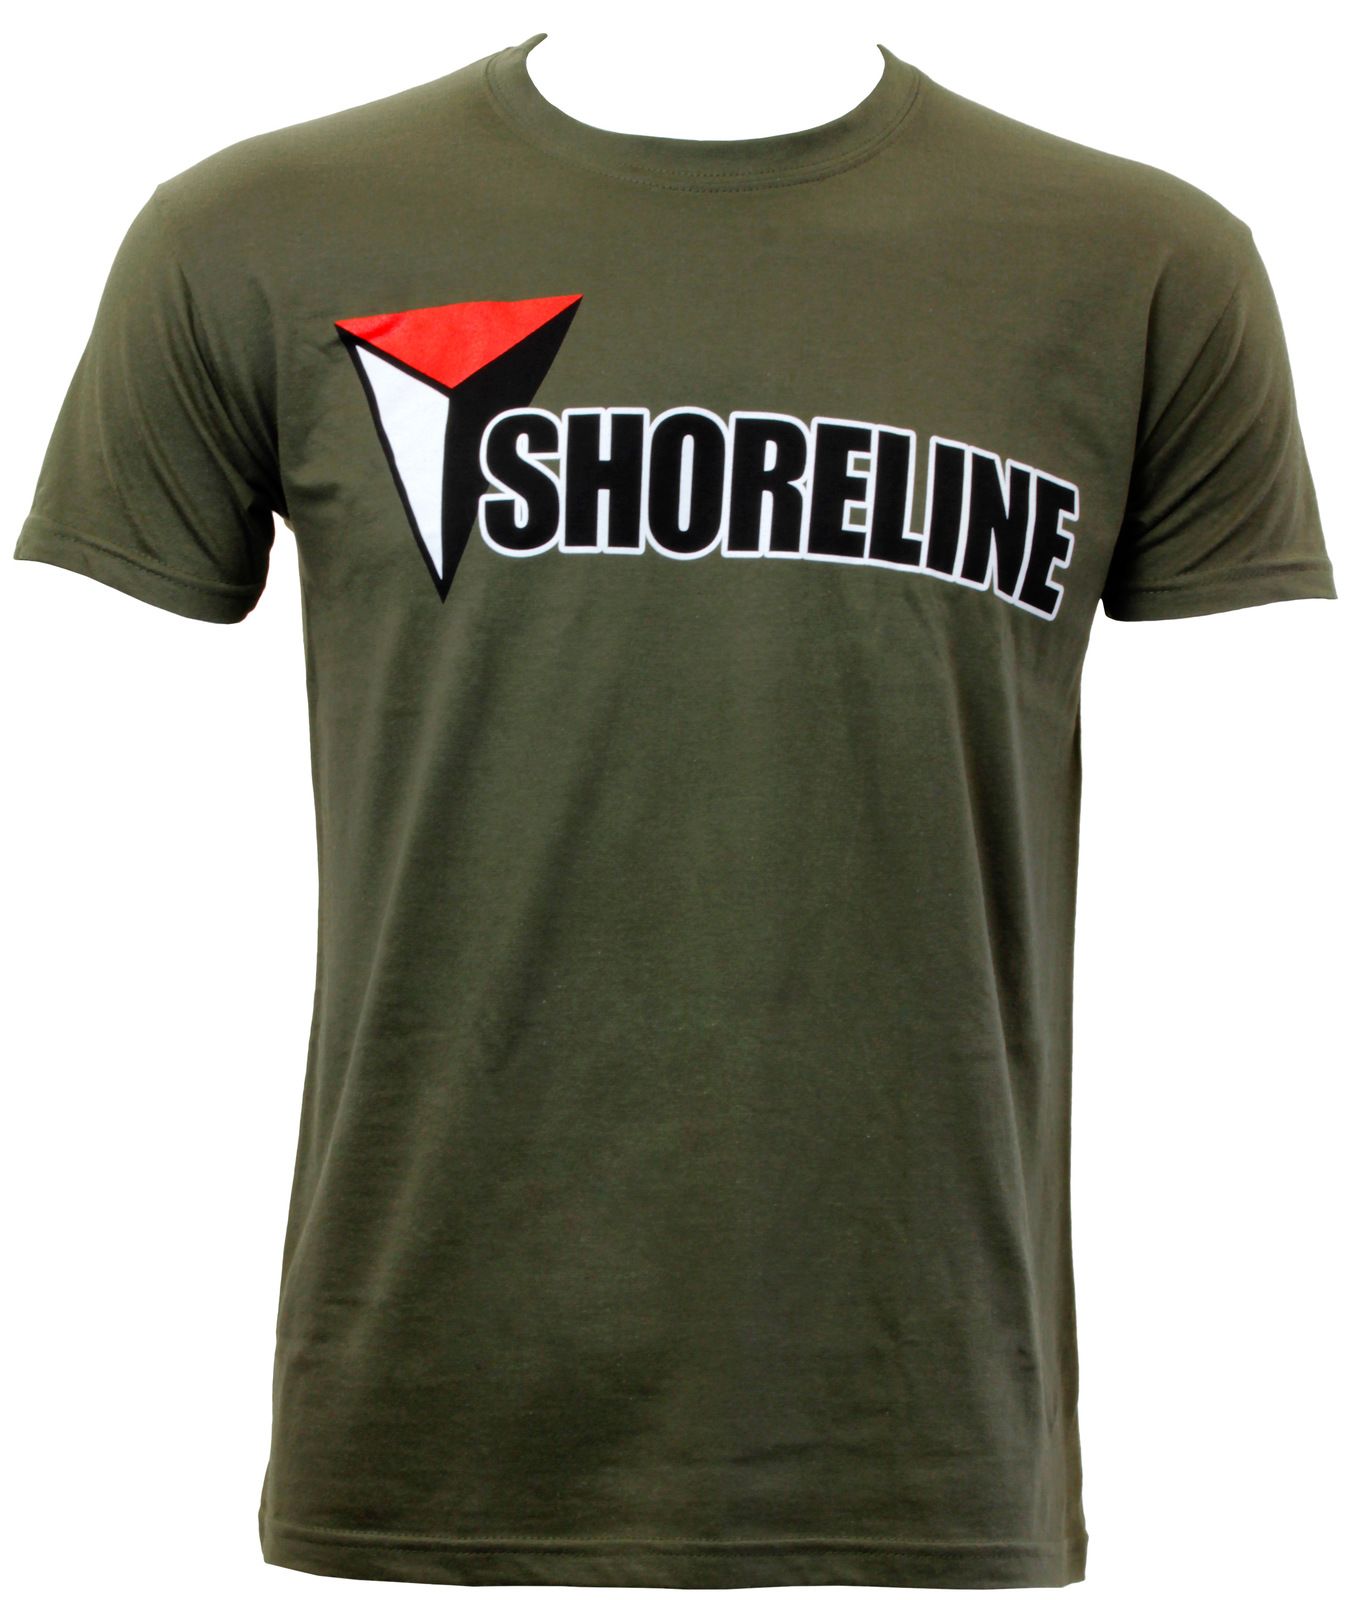 Uncharted 4 Shoreline Army T-Shirt - L